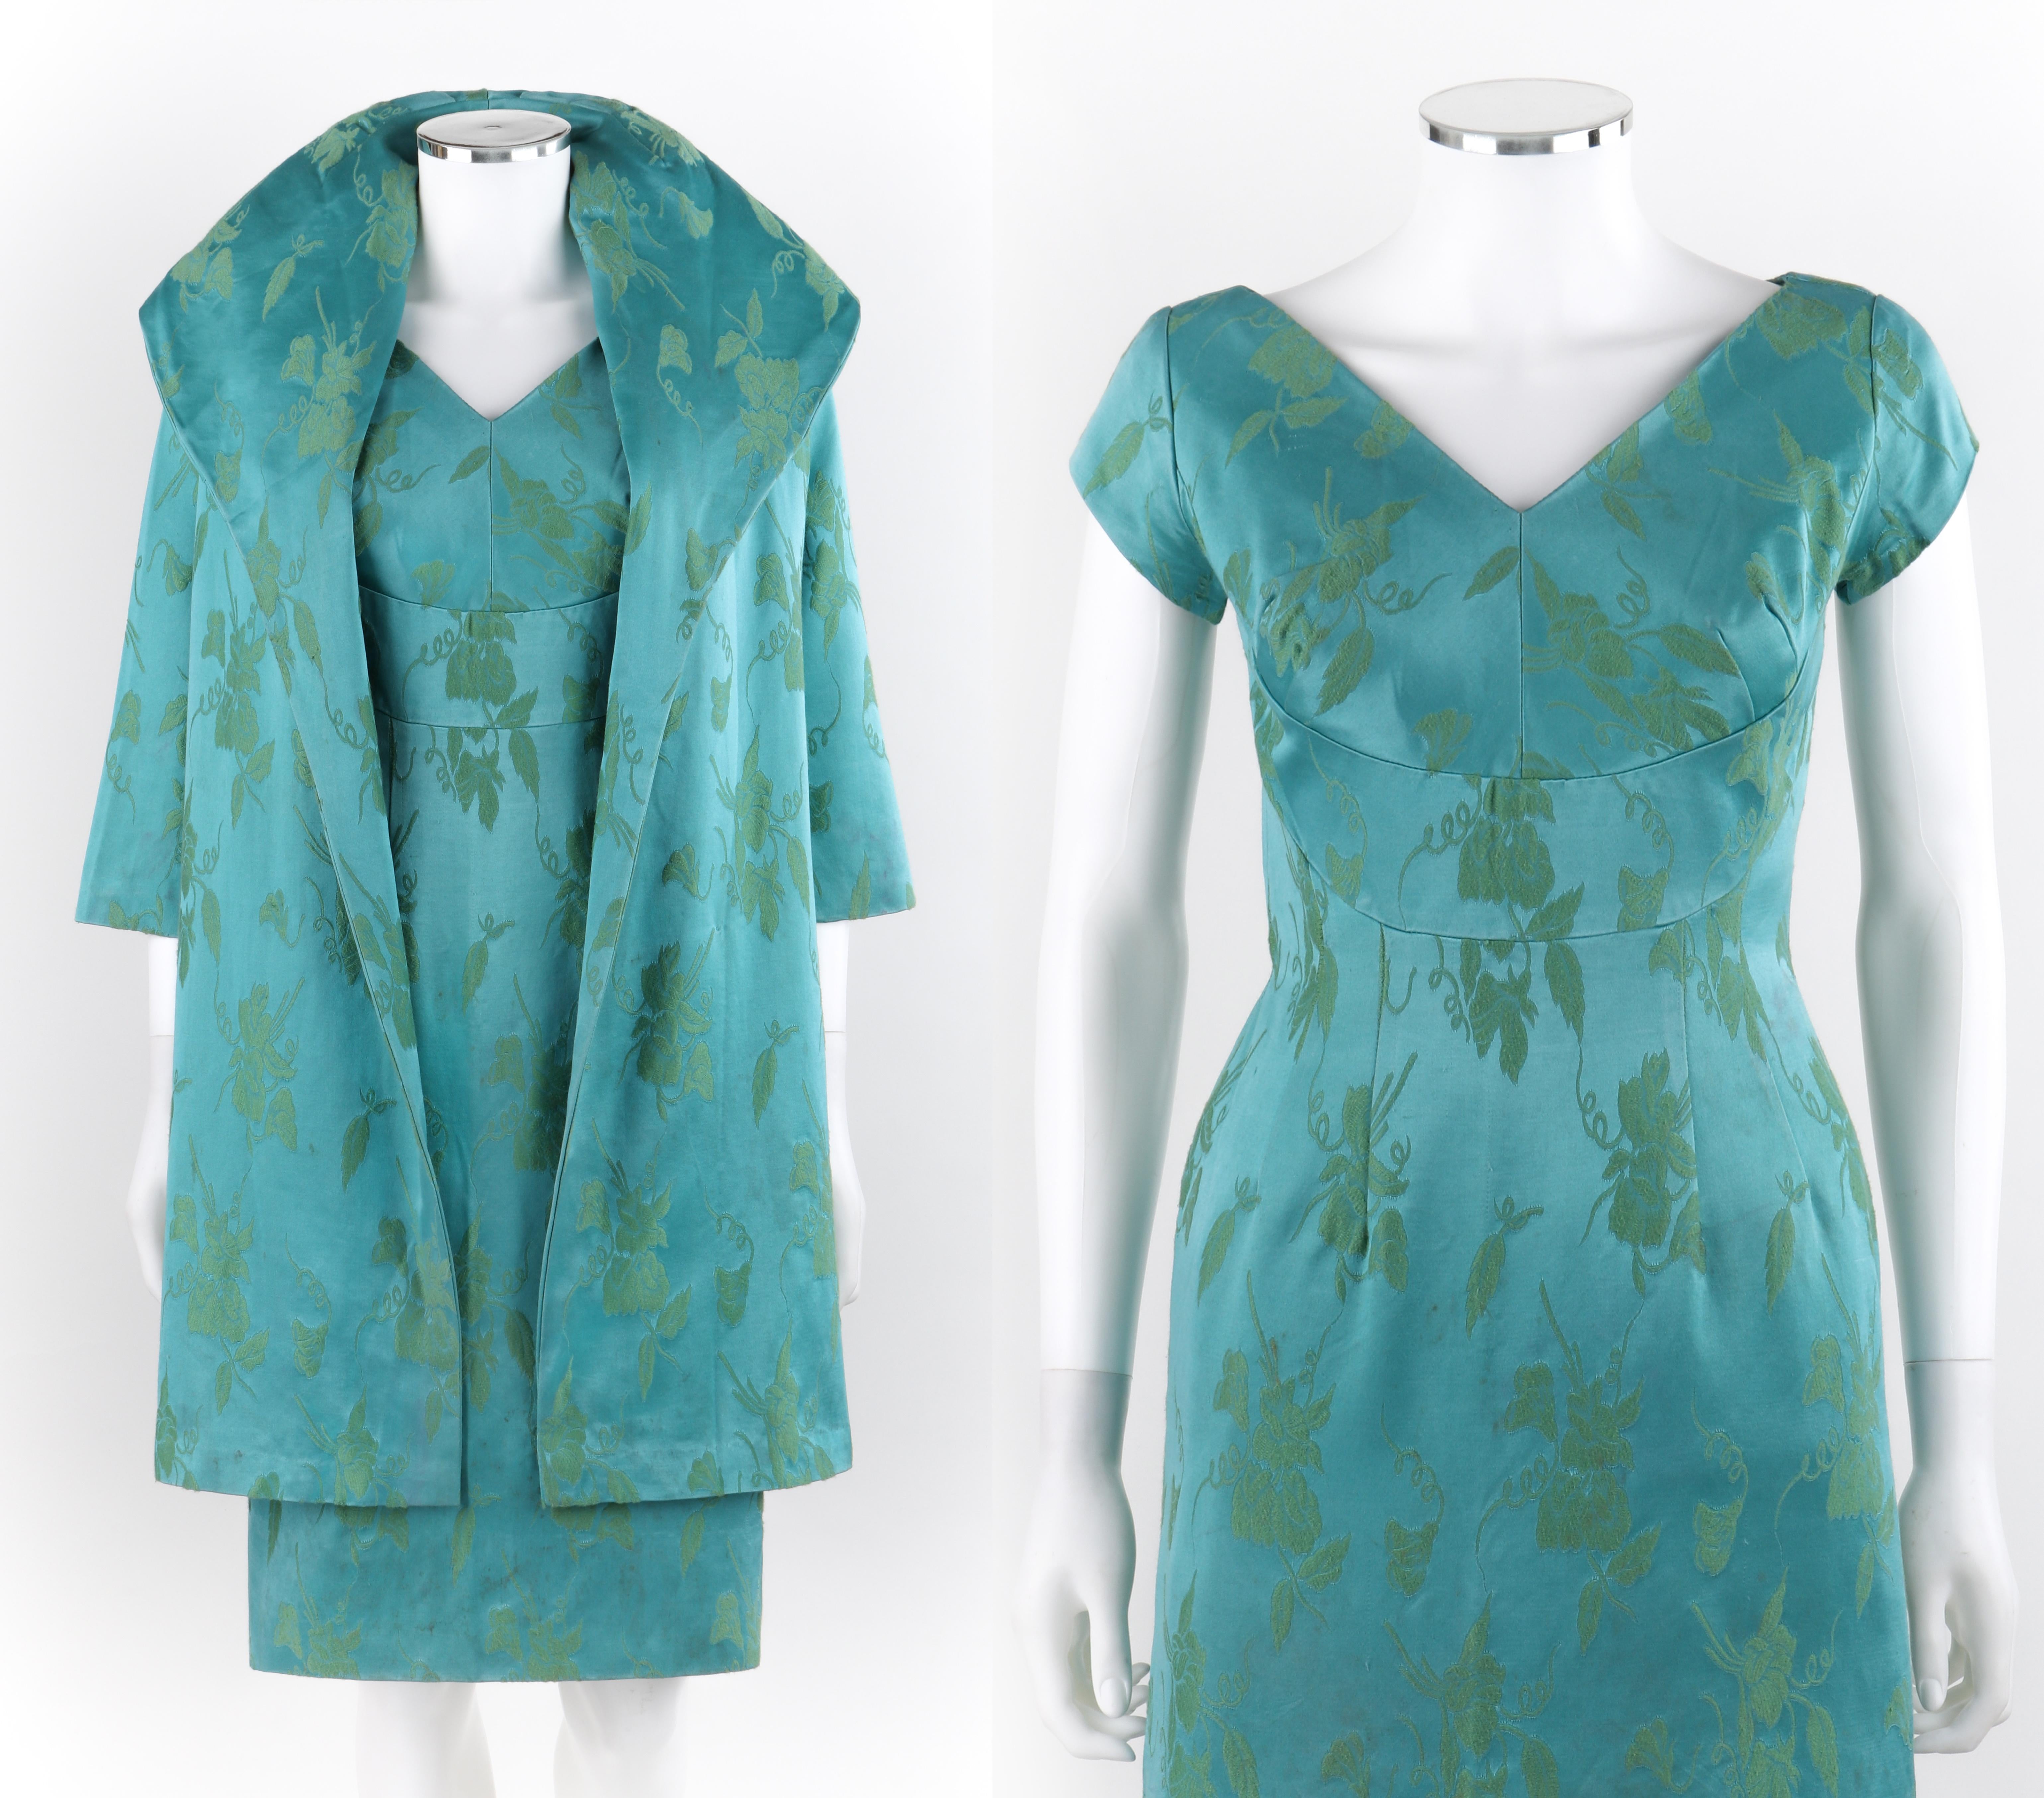 MOLLY MODES New York c.1950’s 2 Pc Blue Green Floral Silk Dress Swing Coat Set 

Circa: Late 1950’s 
Label(s): Molly Modes New York; ILGWU tag
Style: Sheath dress; Swing coat
Color(s): Shades of blue and green 
Lined: Yes - Jacket
Unmarked Fabric